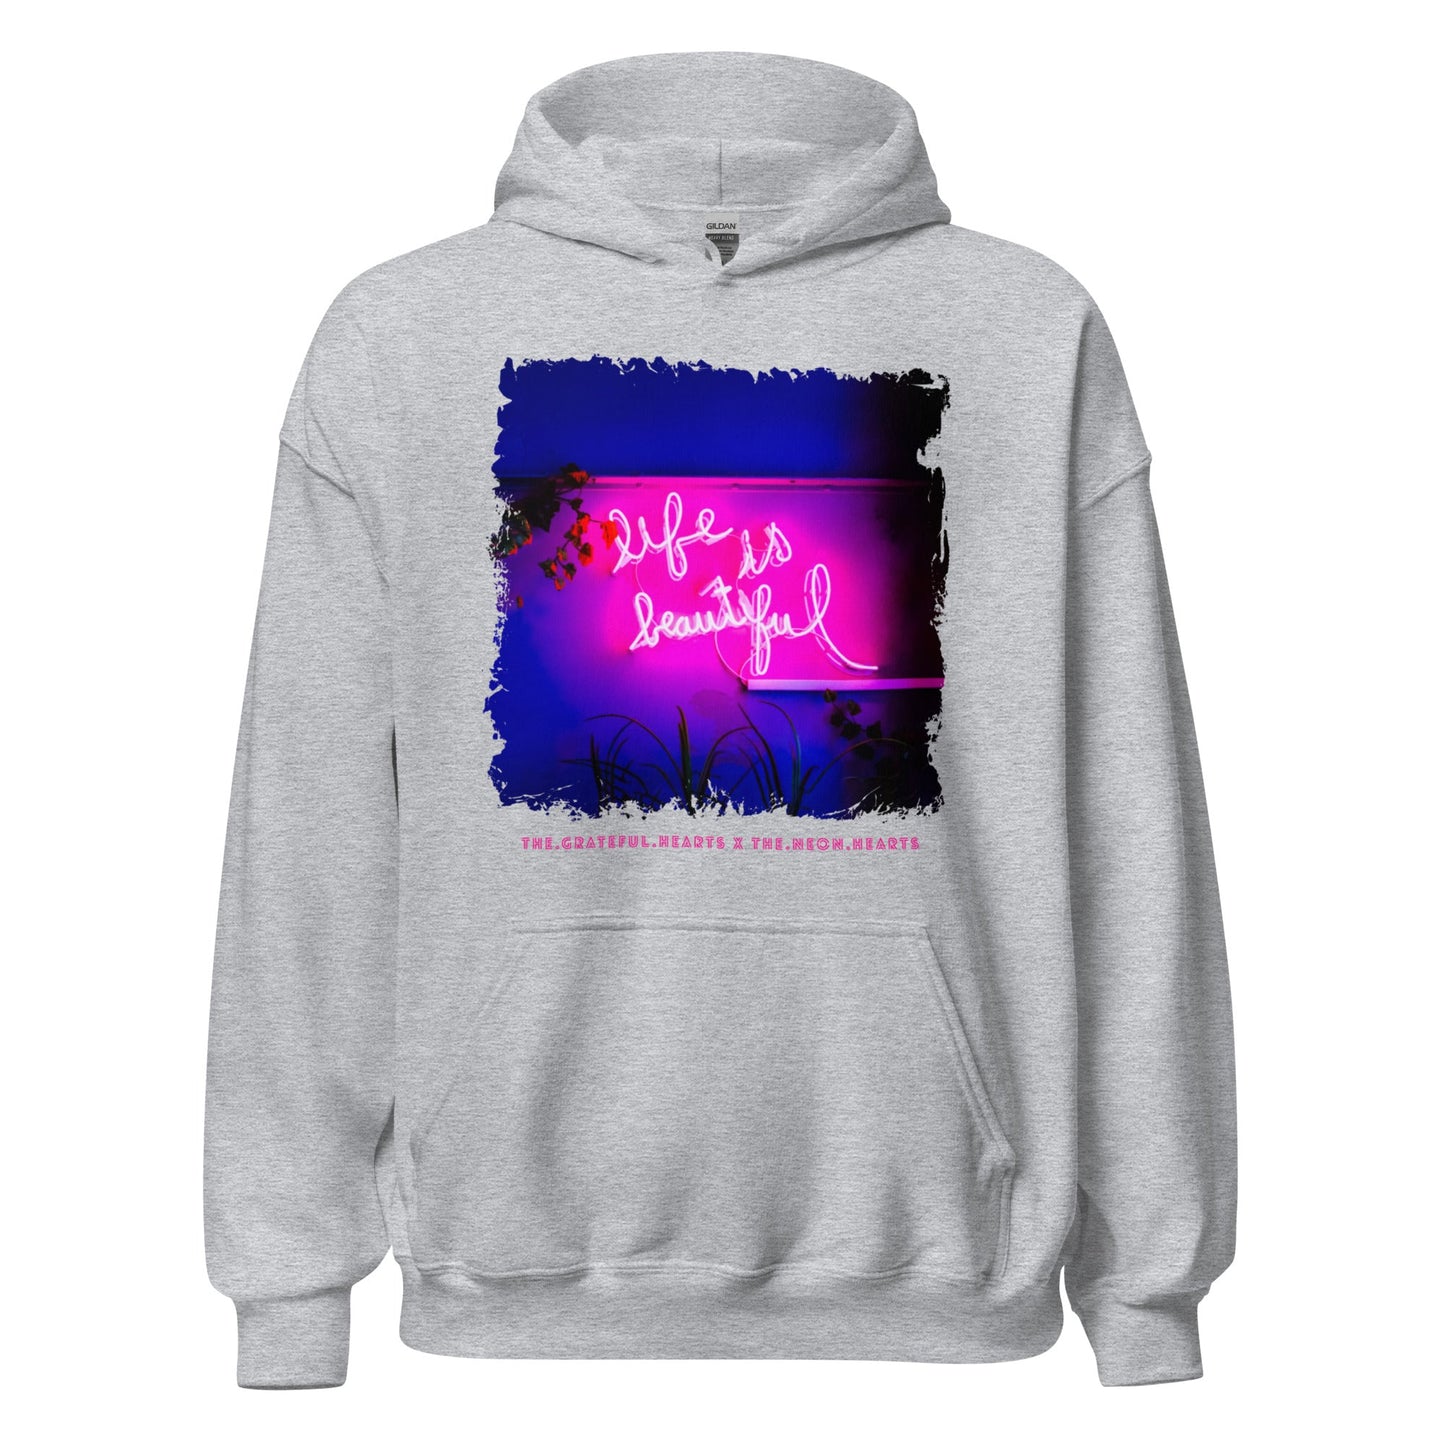 Life is Beautiful 💖 - Unisex Heavy Blend Hoodie (Available in Various Colors ❤️💙💜) - The Grateful Hearts